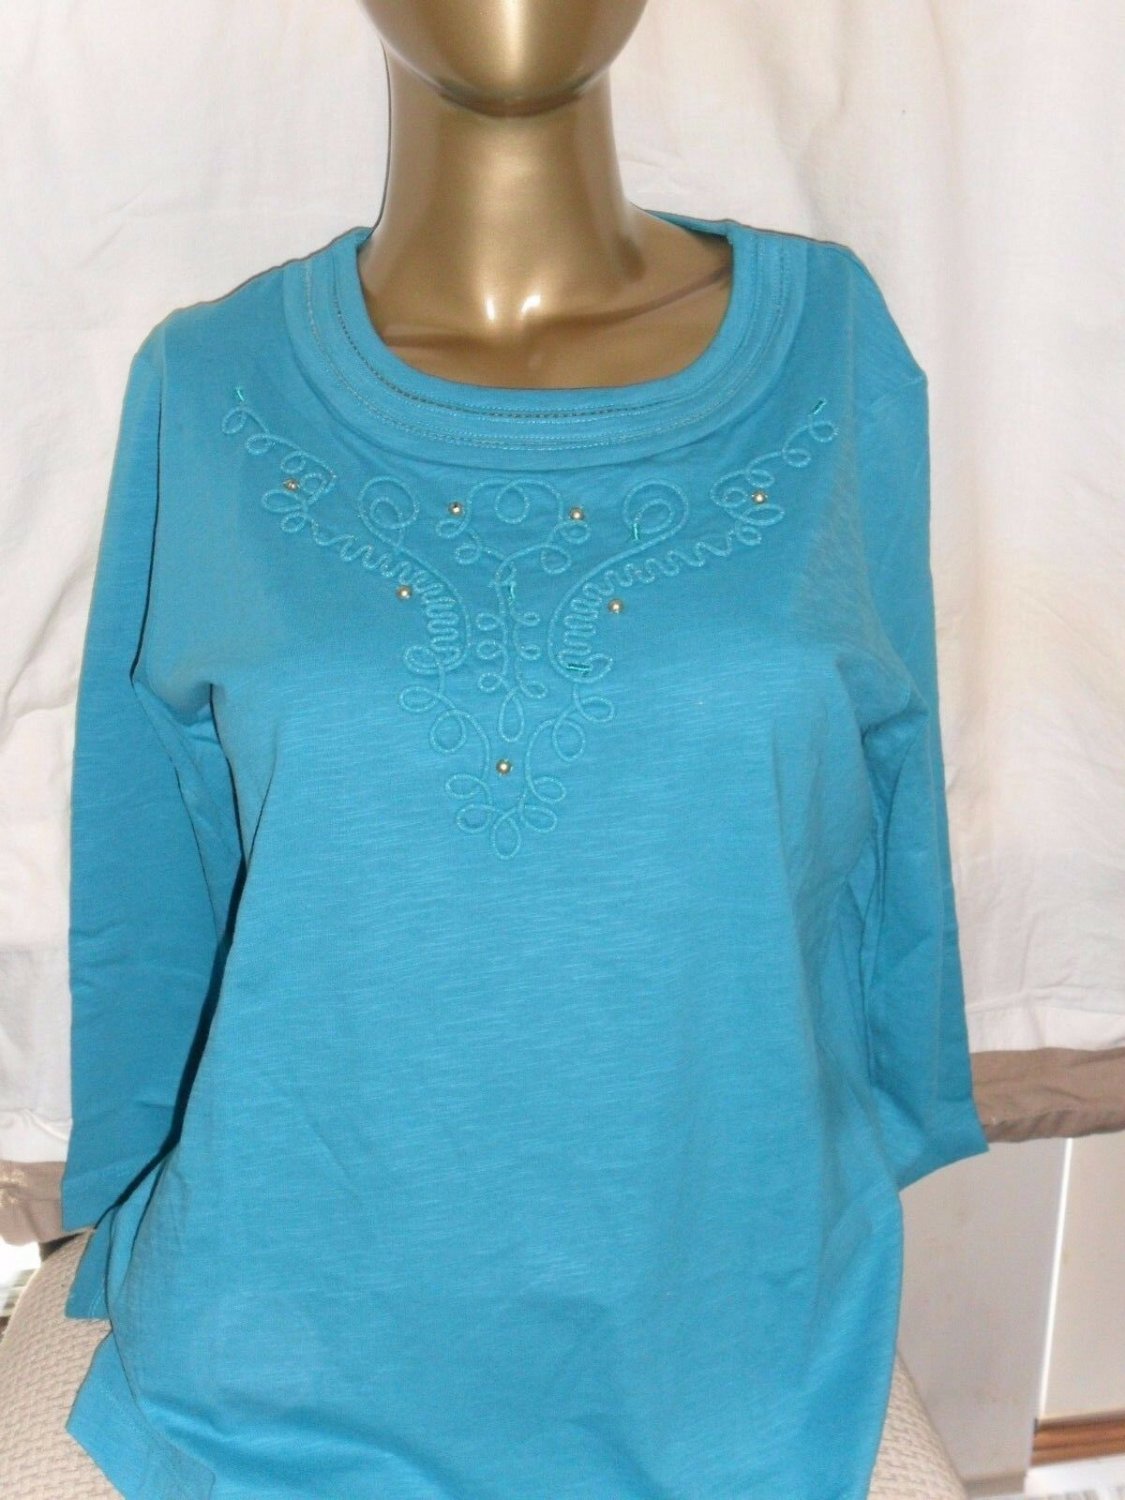 Women's Scroll Pattern Neckline Pullover 3/4 Sleeve Small Teal - NEW!